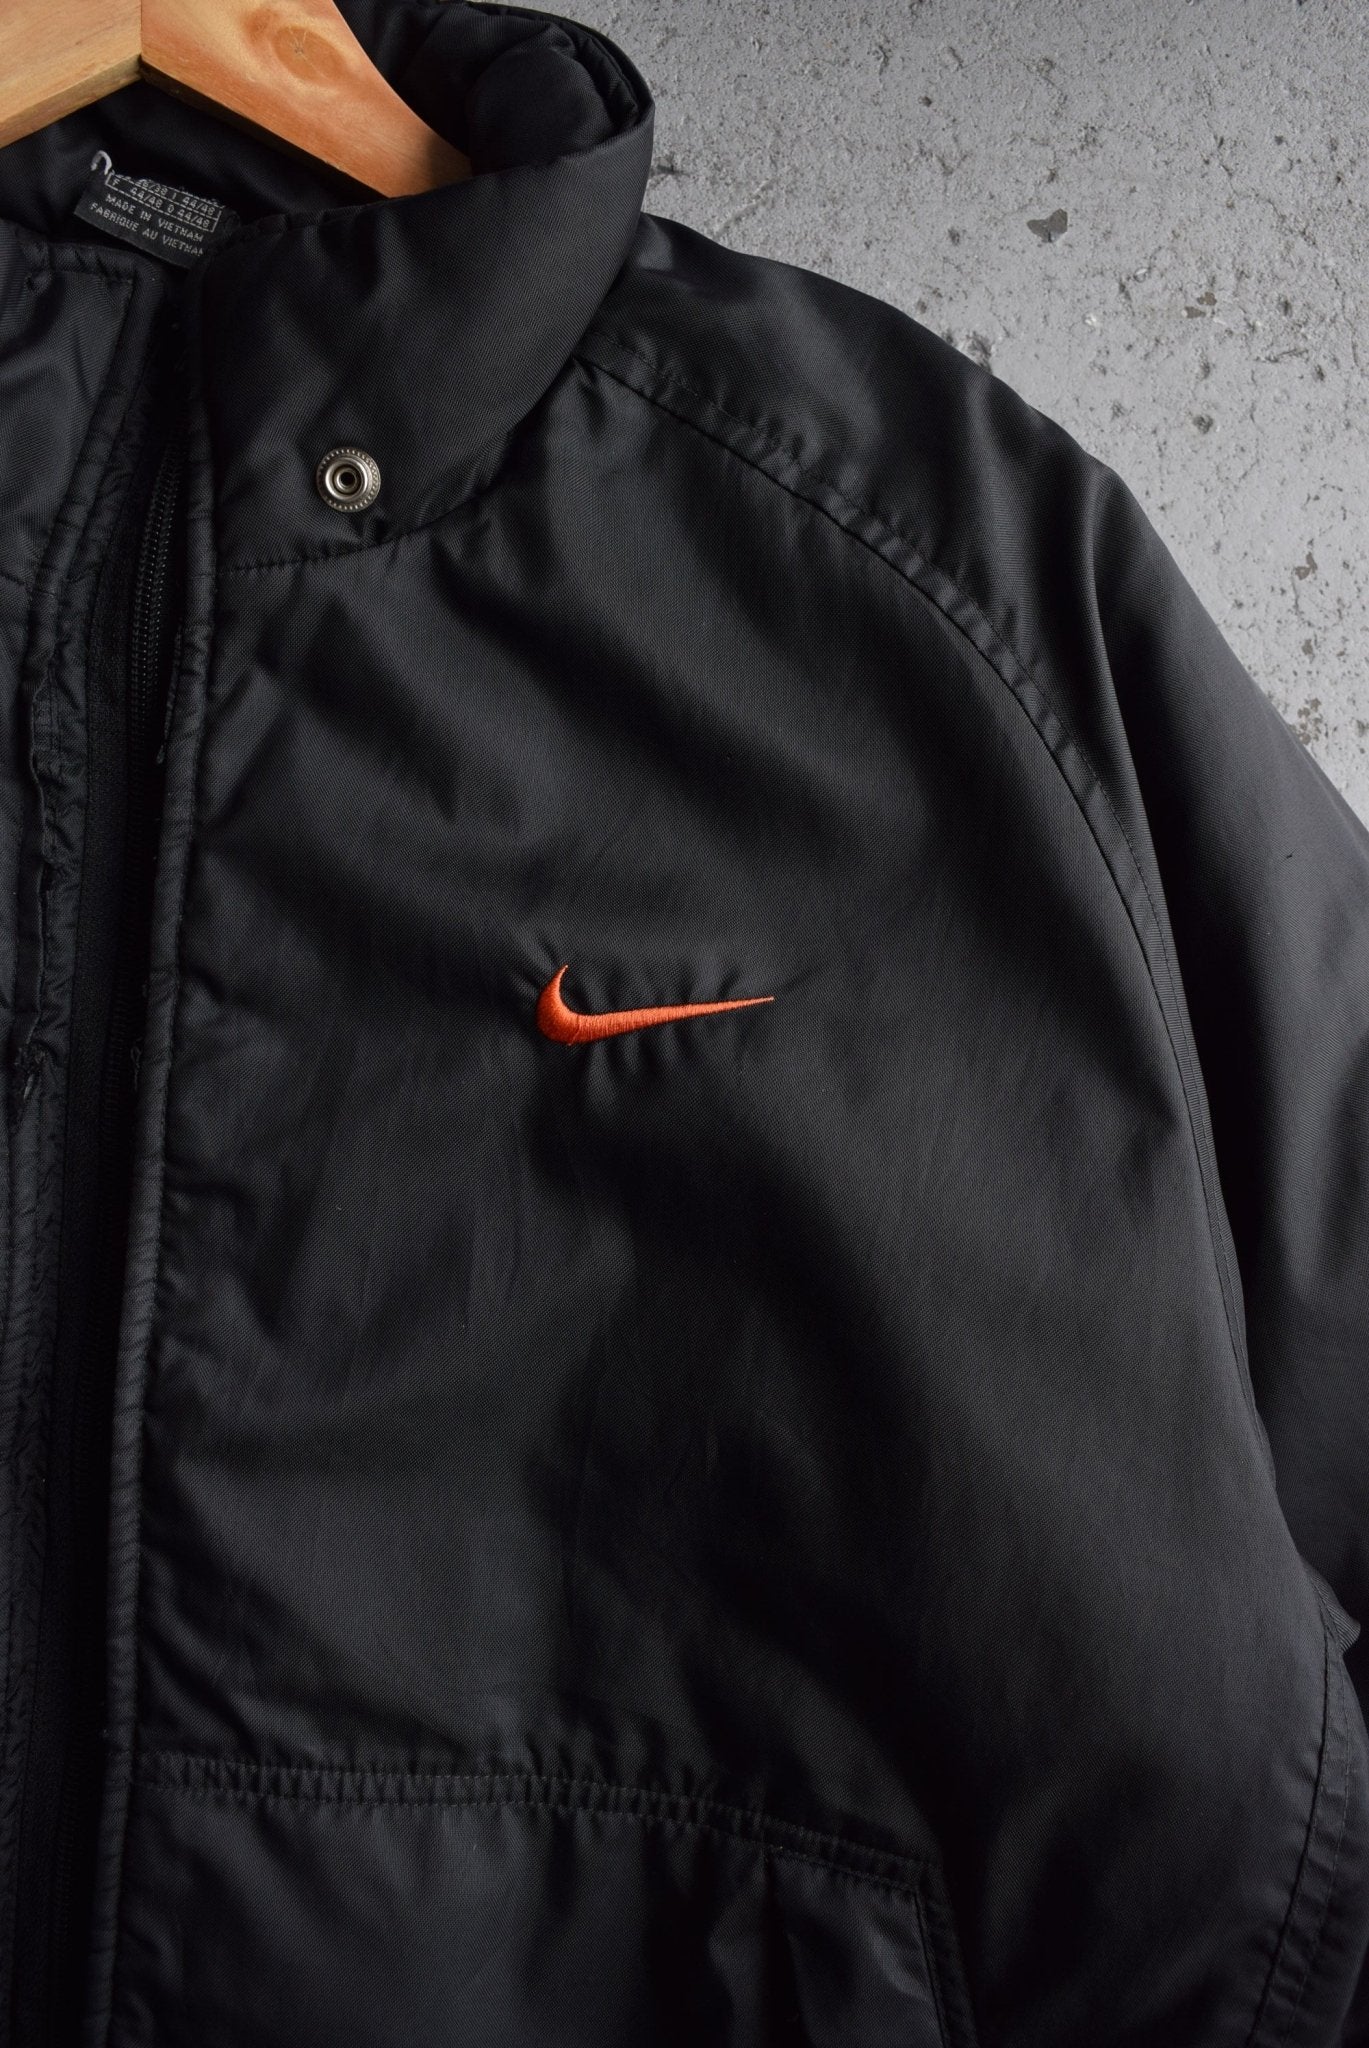 *RARE* Vintage 90s Nike Spellout Embroidered Jacket (L) - Retrospective Store